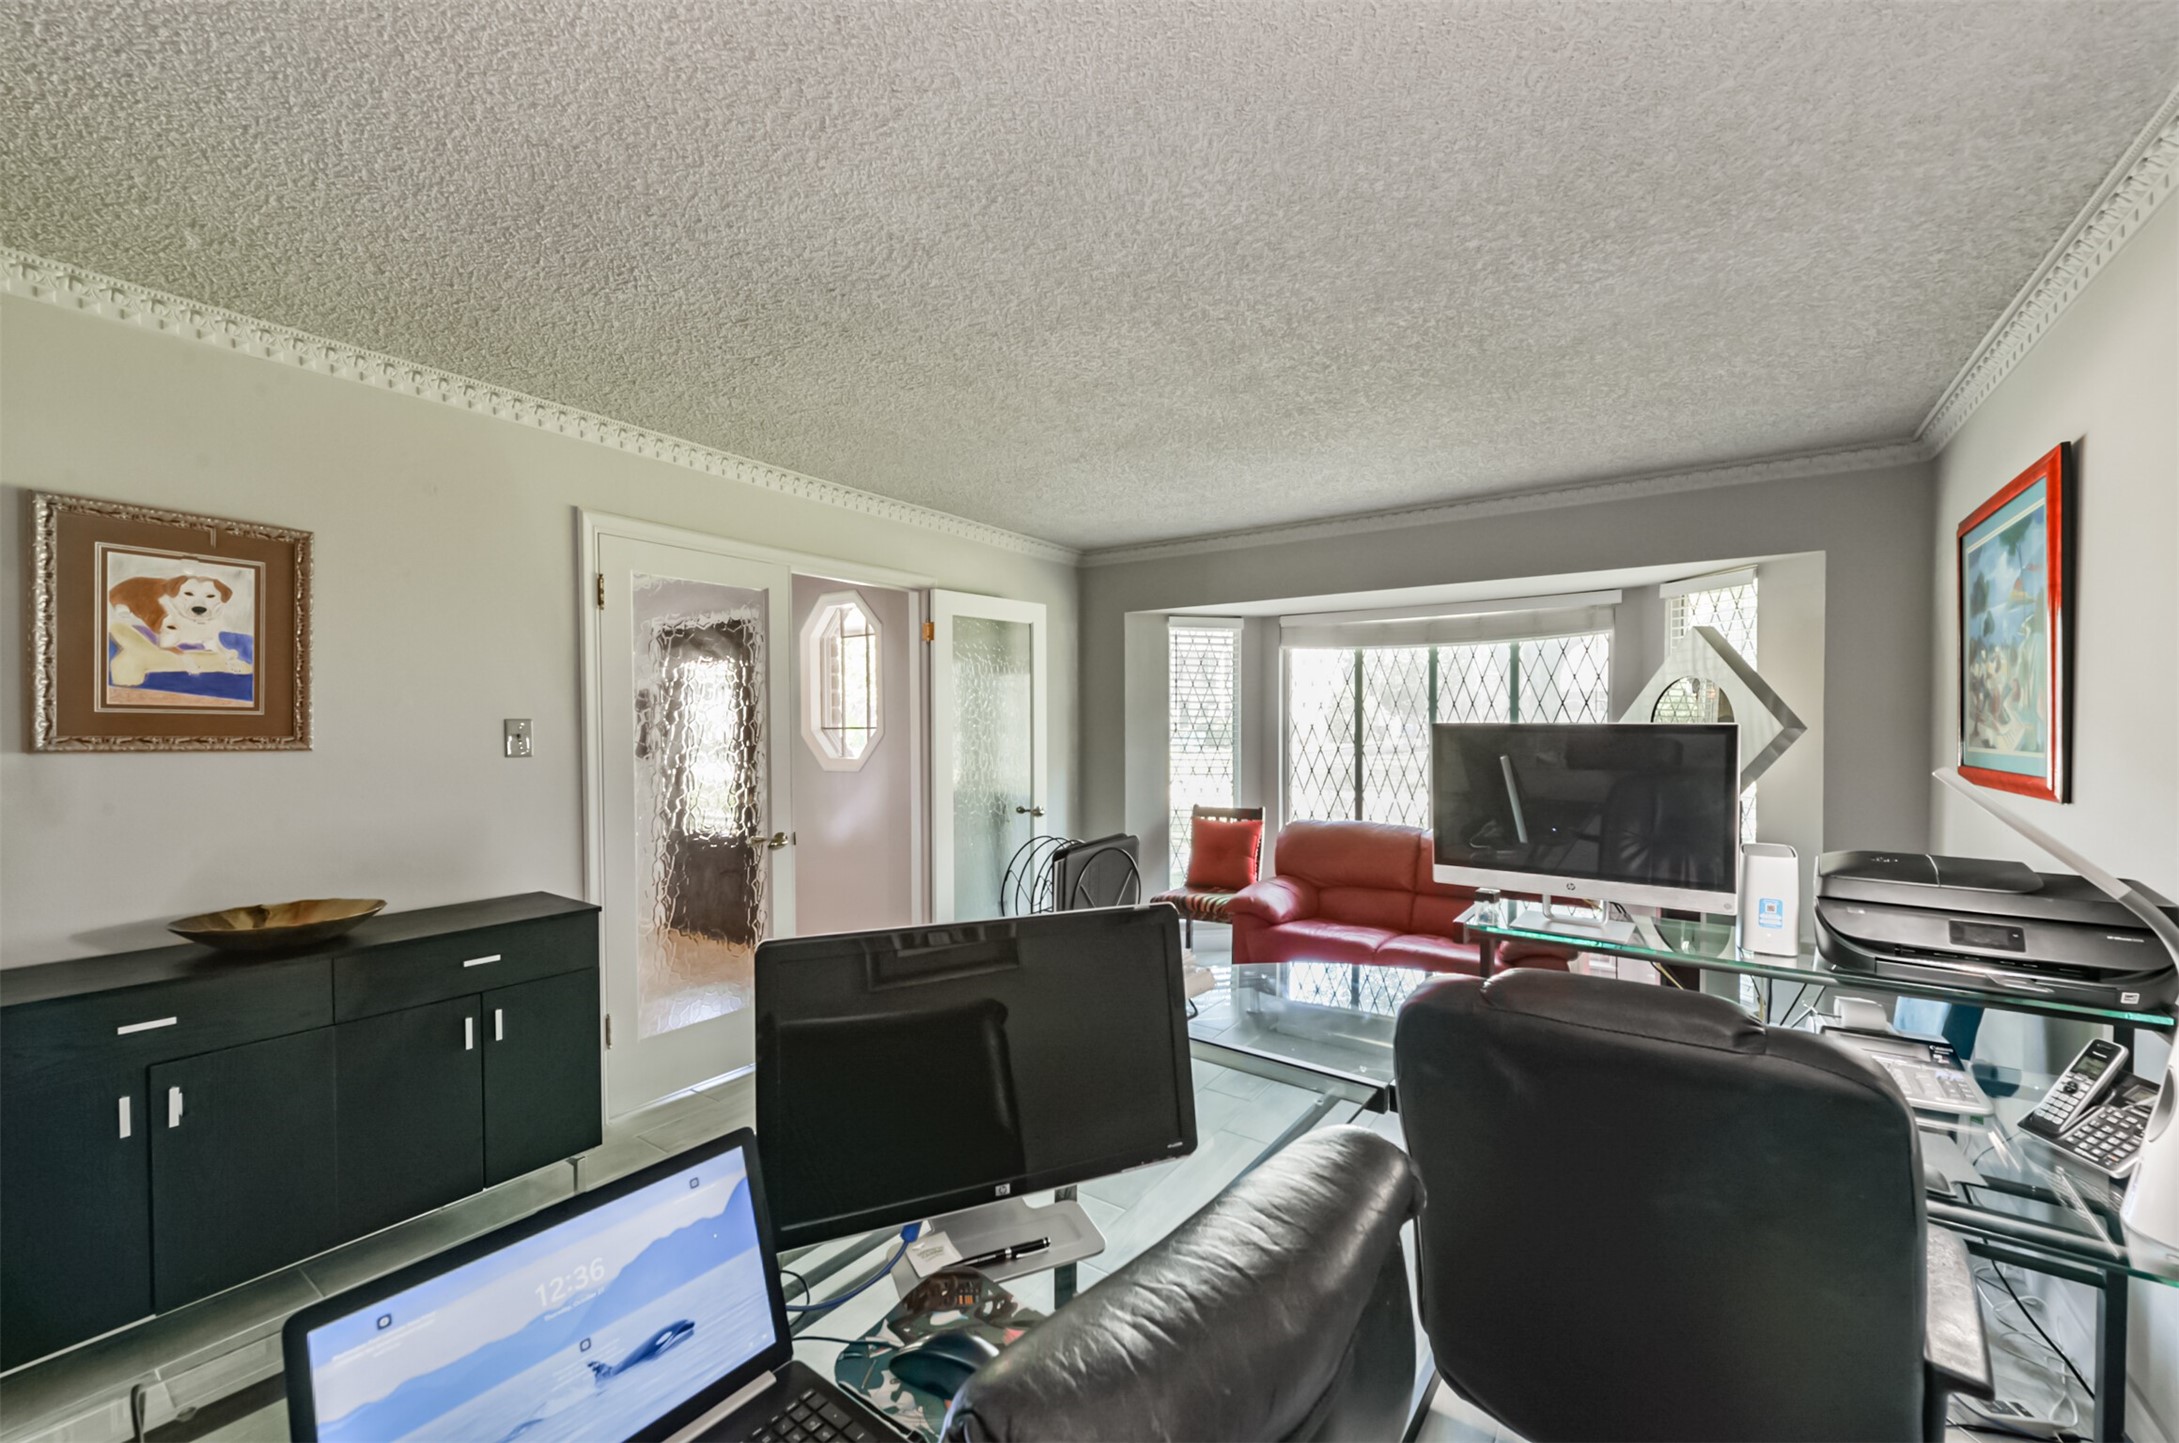 This space is traditionally the formal living room but the seller uses it as his office. The sheer size and view out the window make it fit for a VIP.